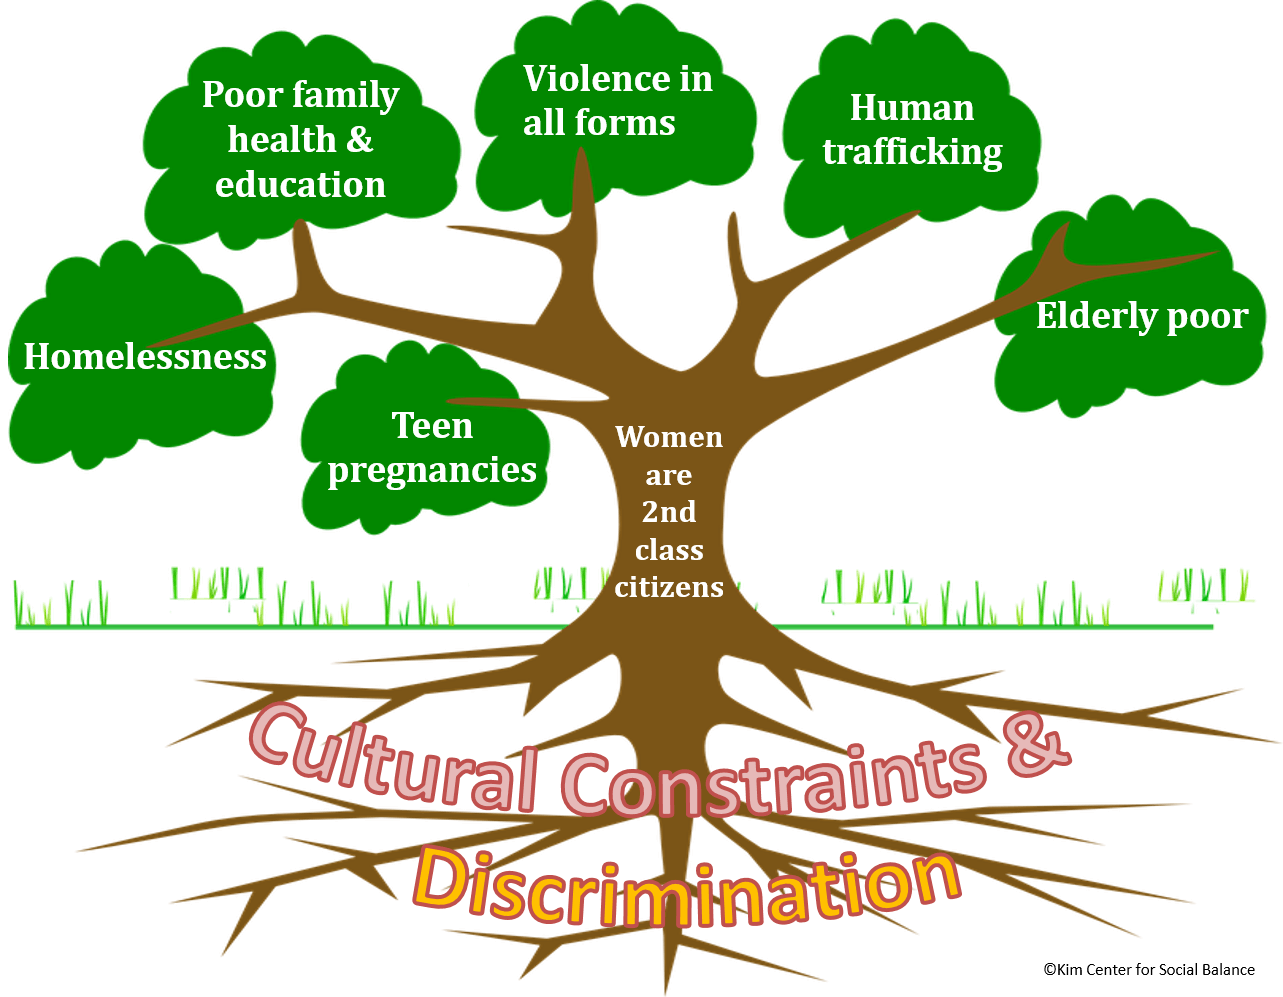 Tree with Cultural Constraints & Discrimination as the Roots, "Women have 2nd Class Status" as the Trunk, and Different Results in the Tree Leaves